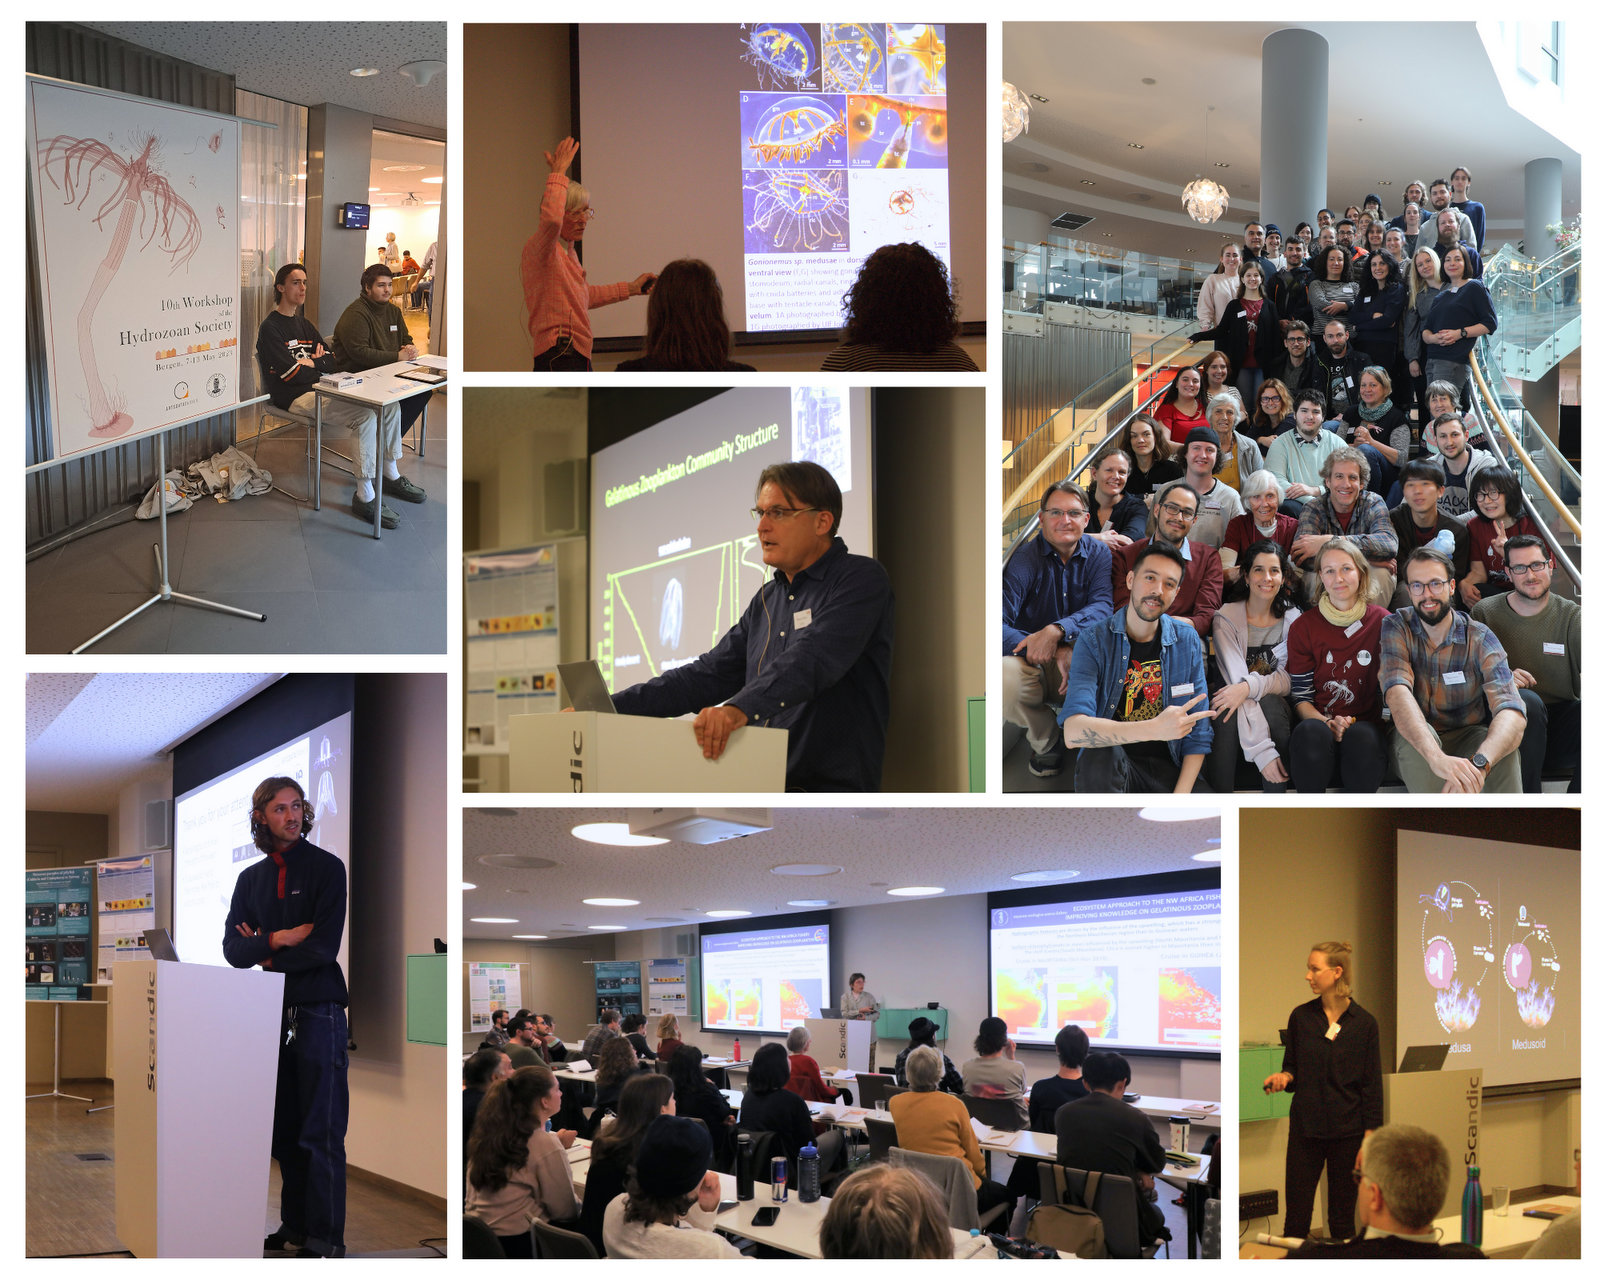 A collage of images showing participants presenting at the venue